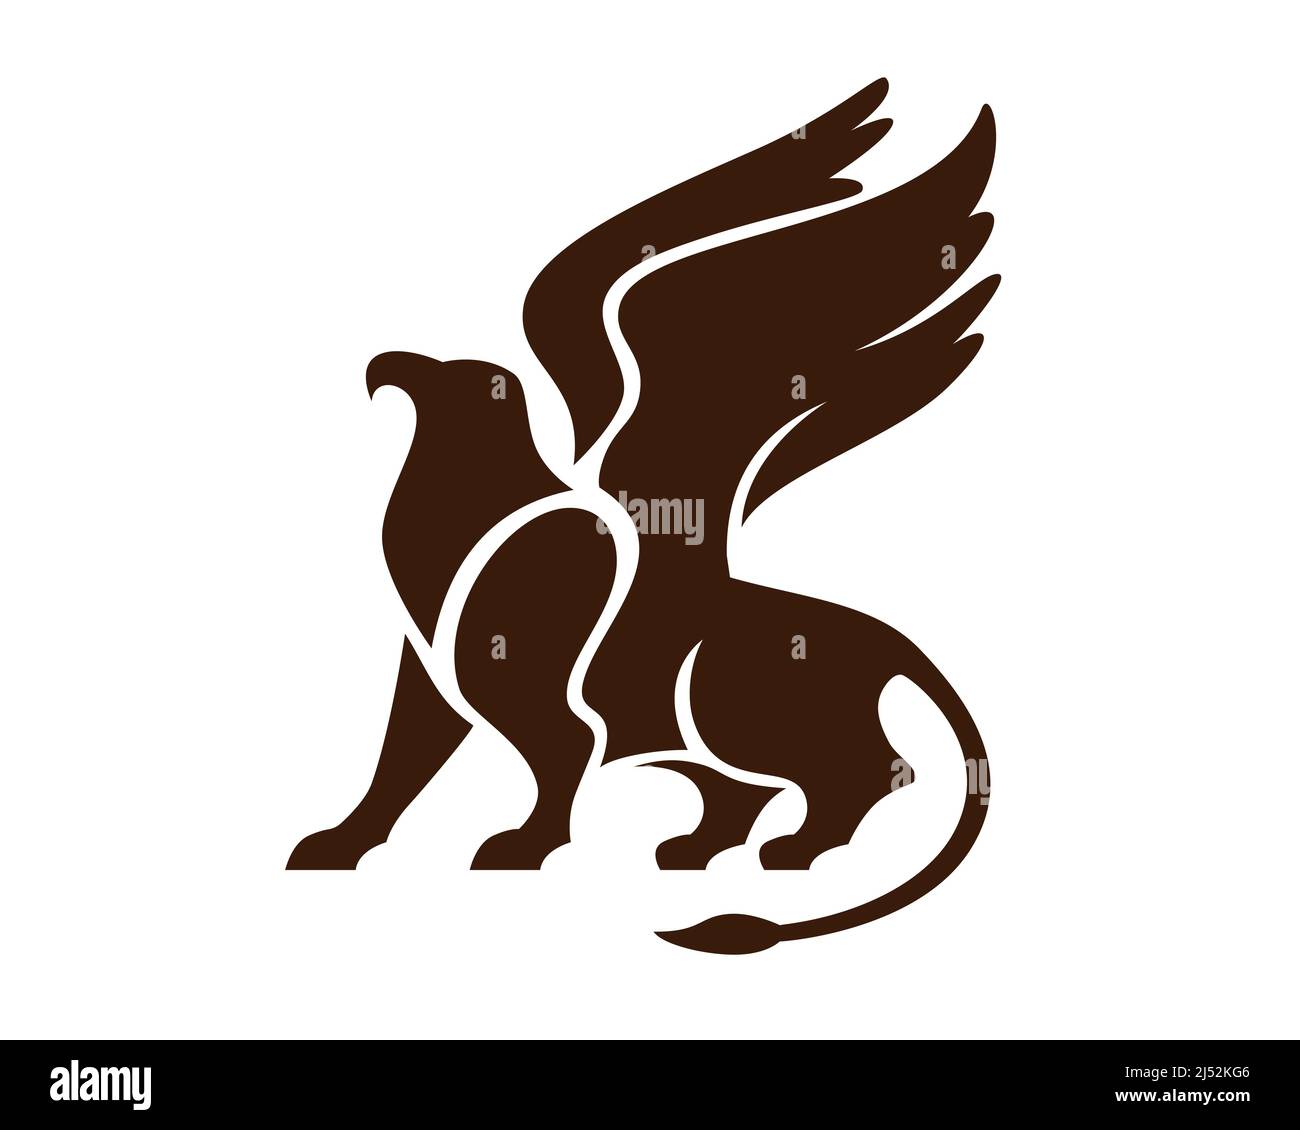 Griffin Mythology Creature Illustration with Silhouette Style Vector Stock Vector